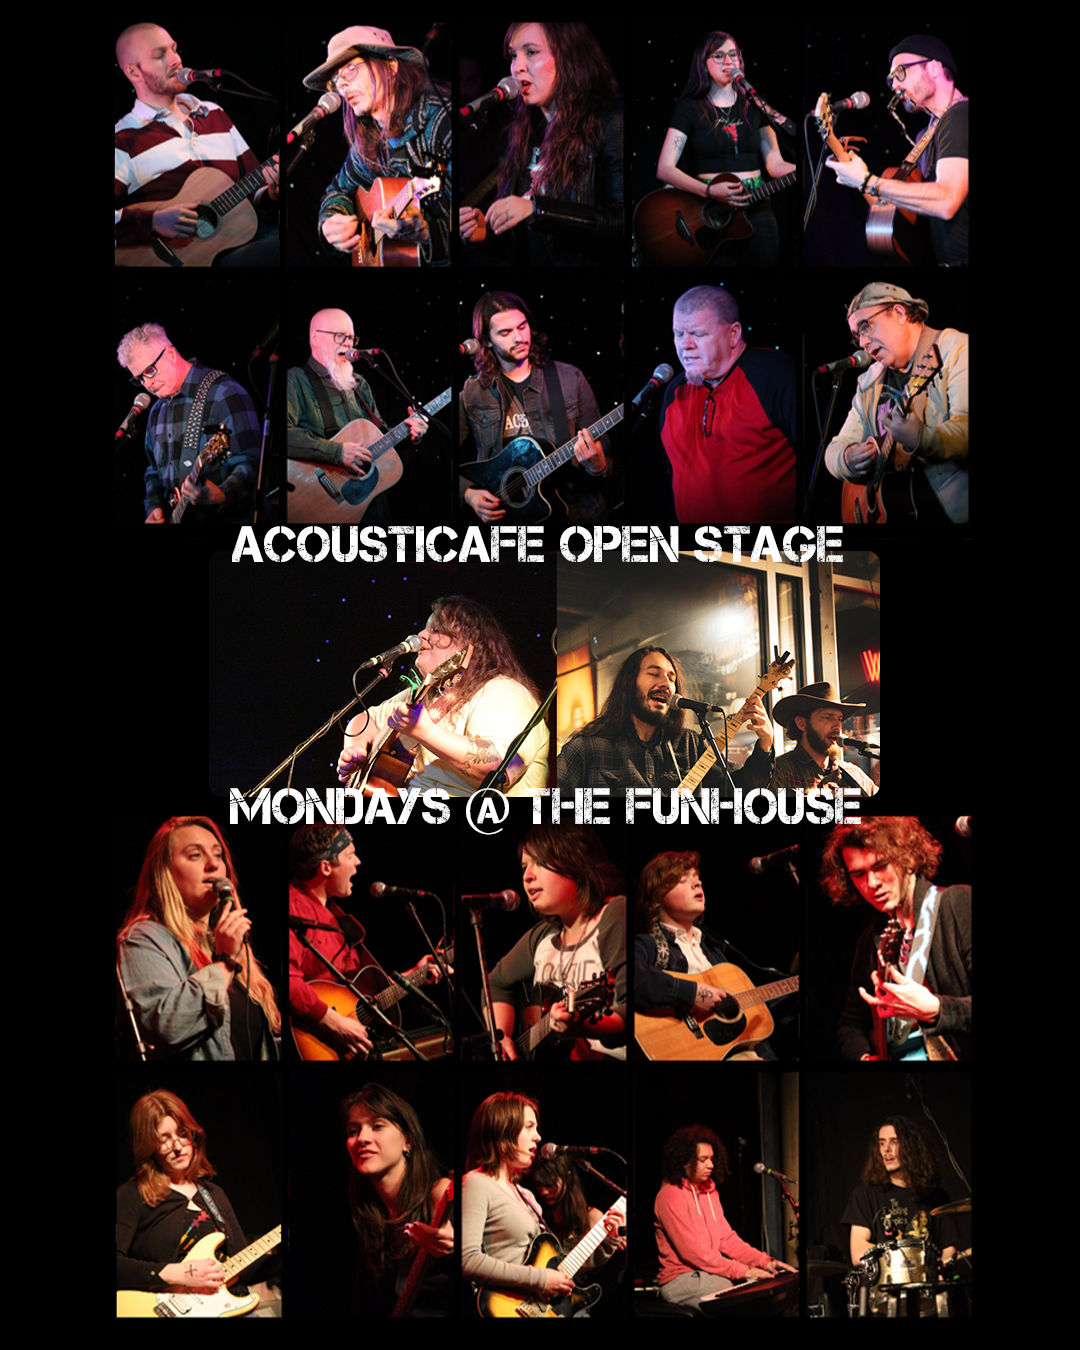 AcoustiCafe Open Stage Mondays in the Funhouse